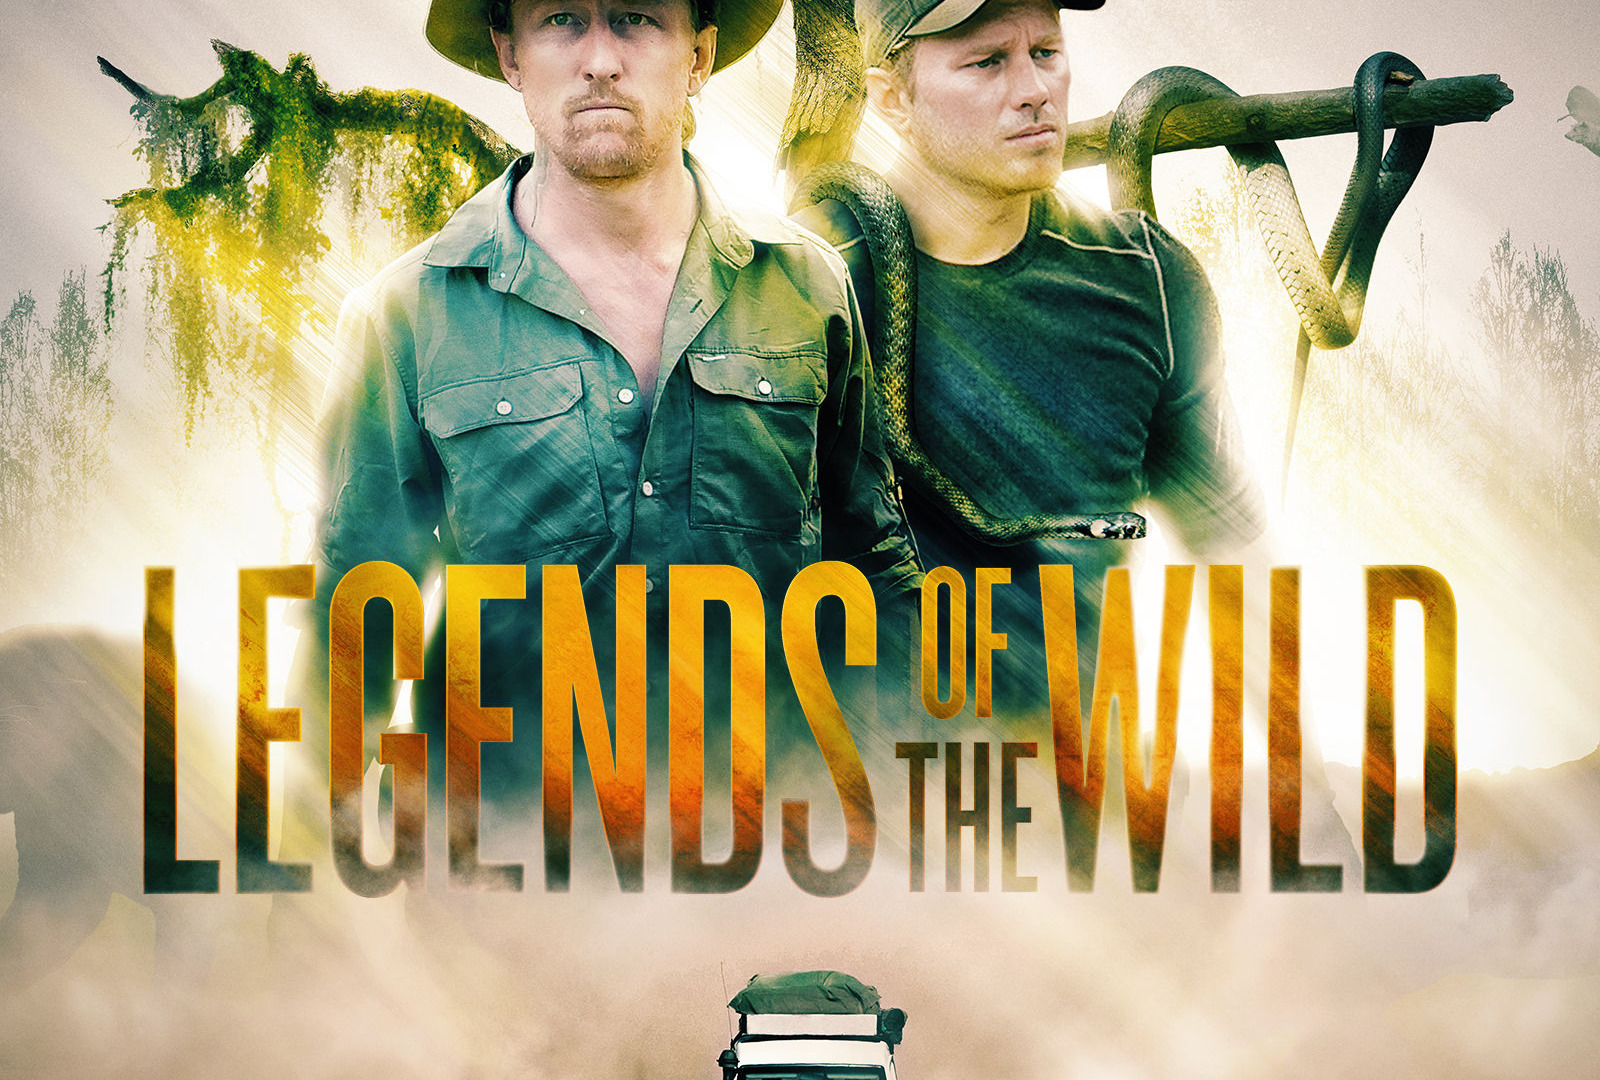 Show Legends of the Wild